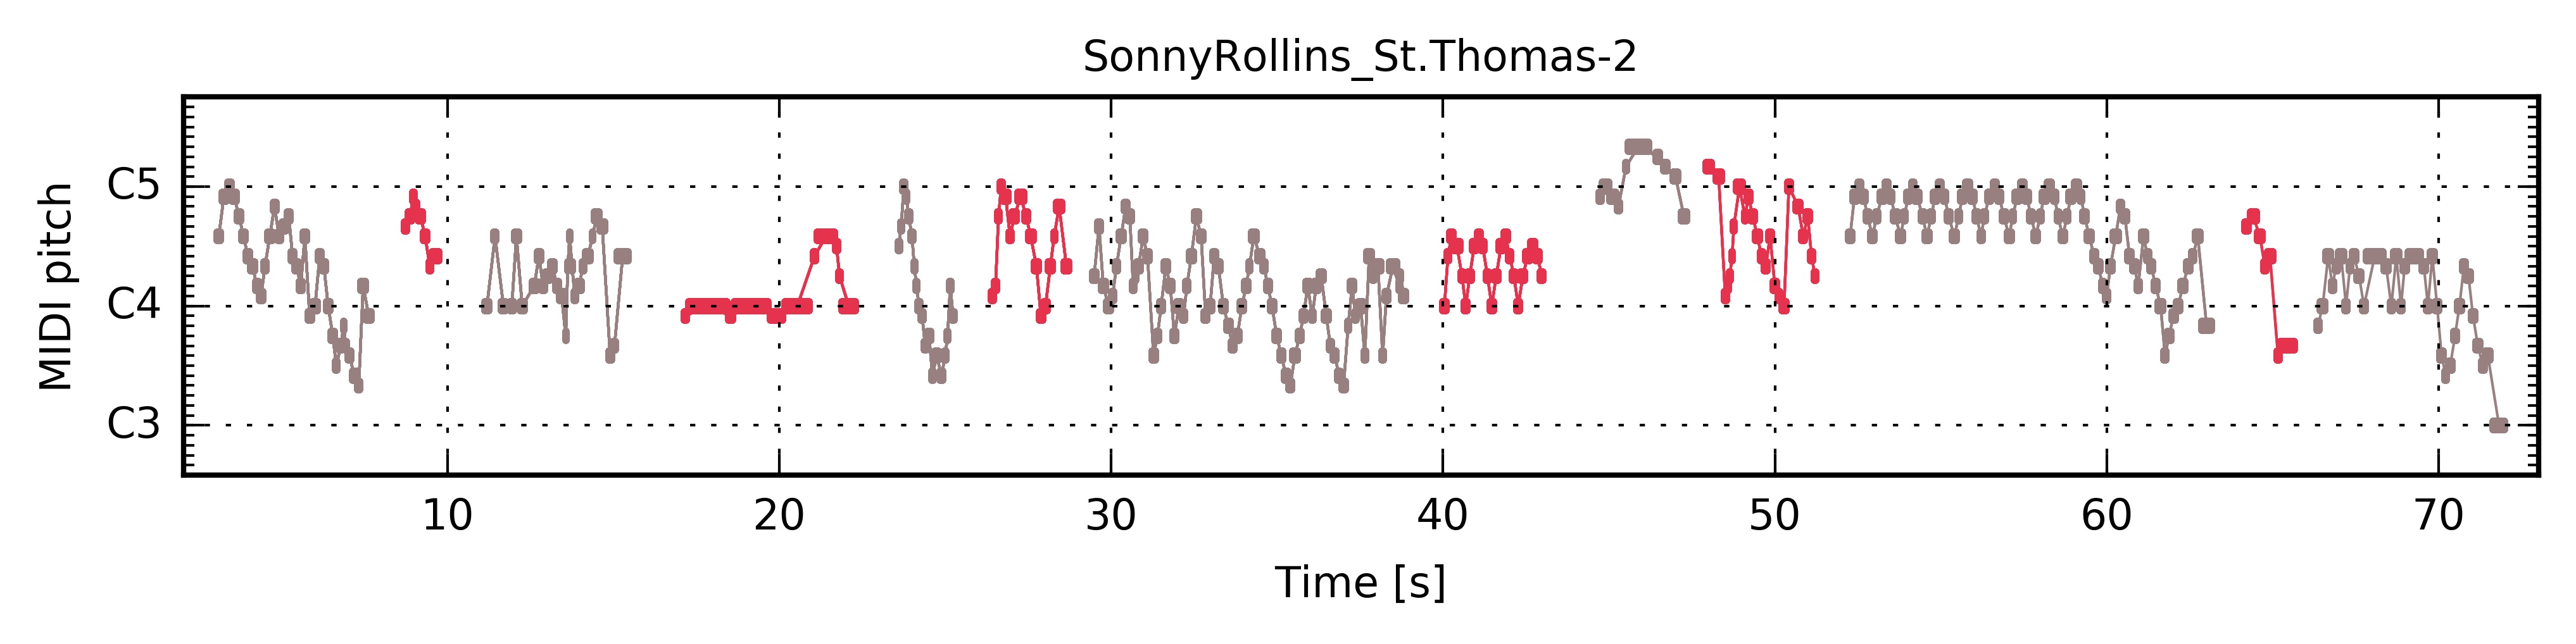 ../../_images/PianoRoll_SonnyRollins_St.Thomas-2.jpg